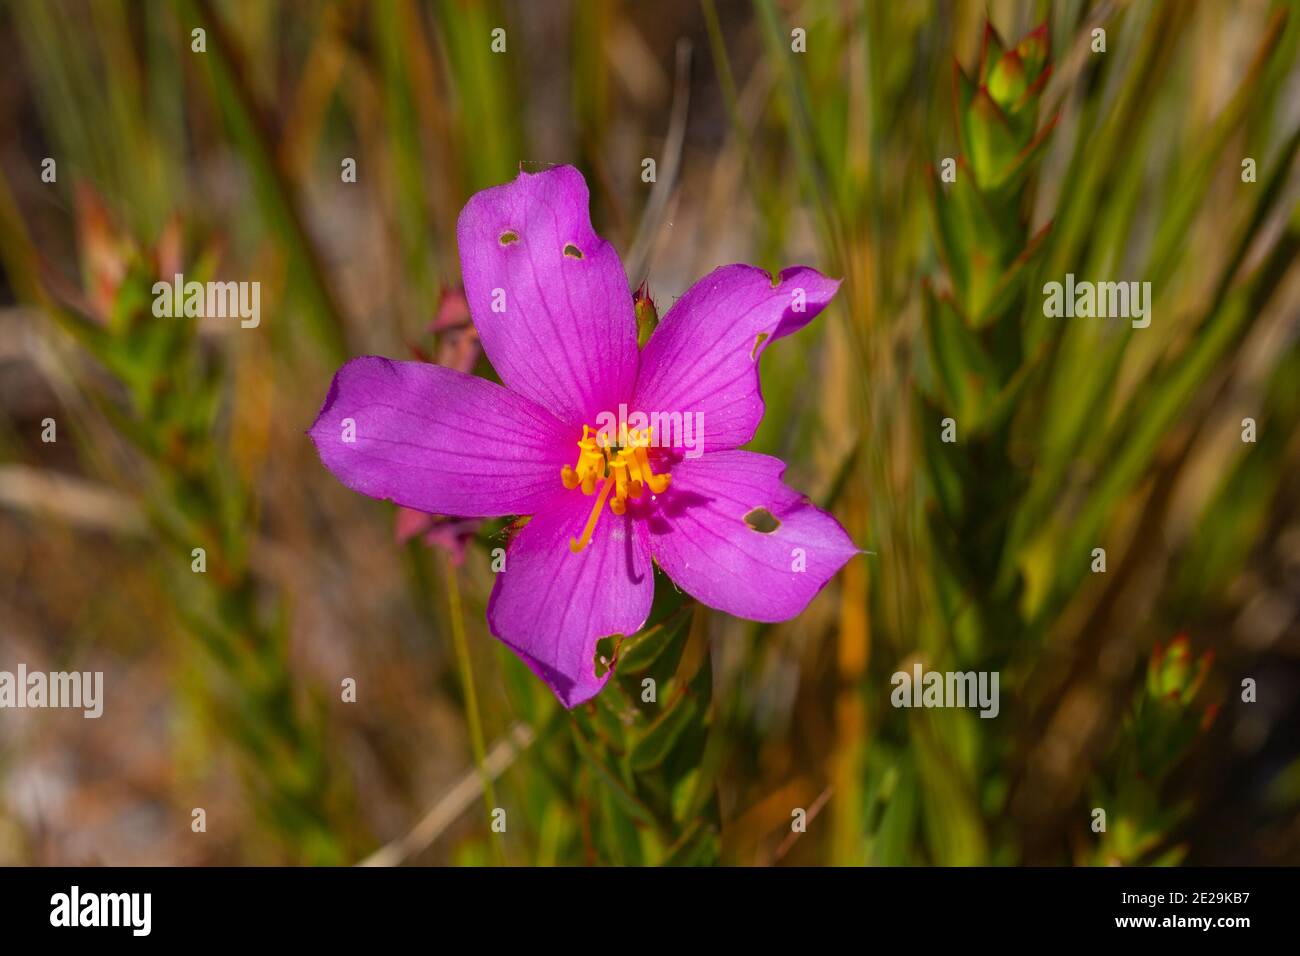 the pink flower of a Lavoisiera sp. in the Serra do Cipó in Minas Gerais, Brazil, frontal view Stock Photo